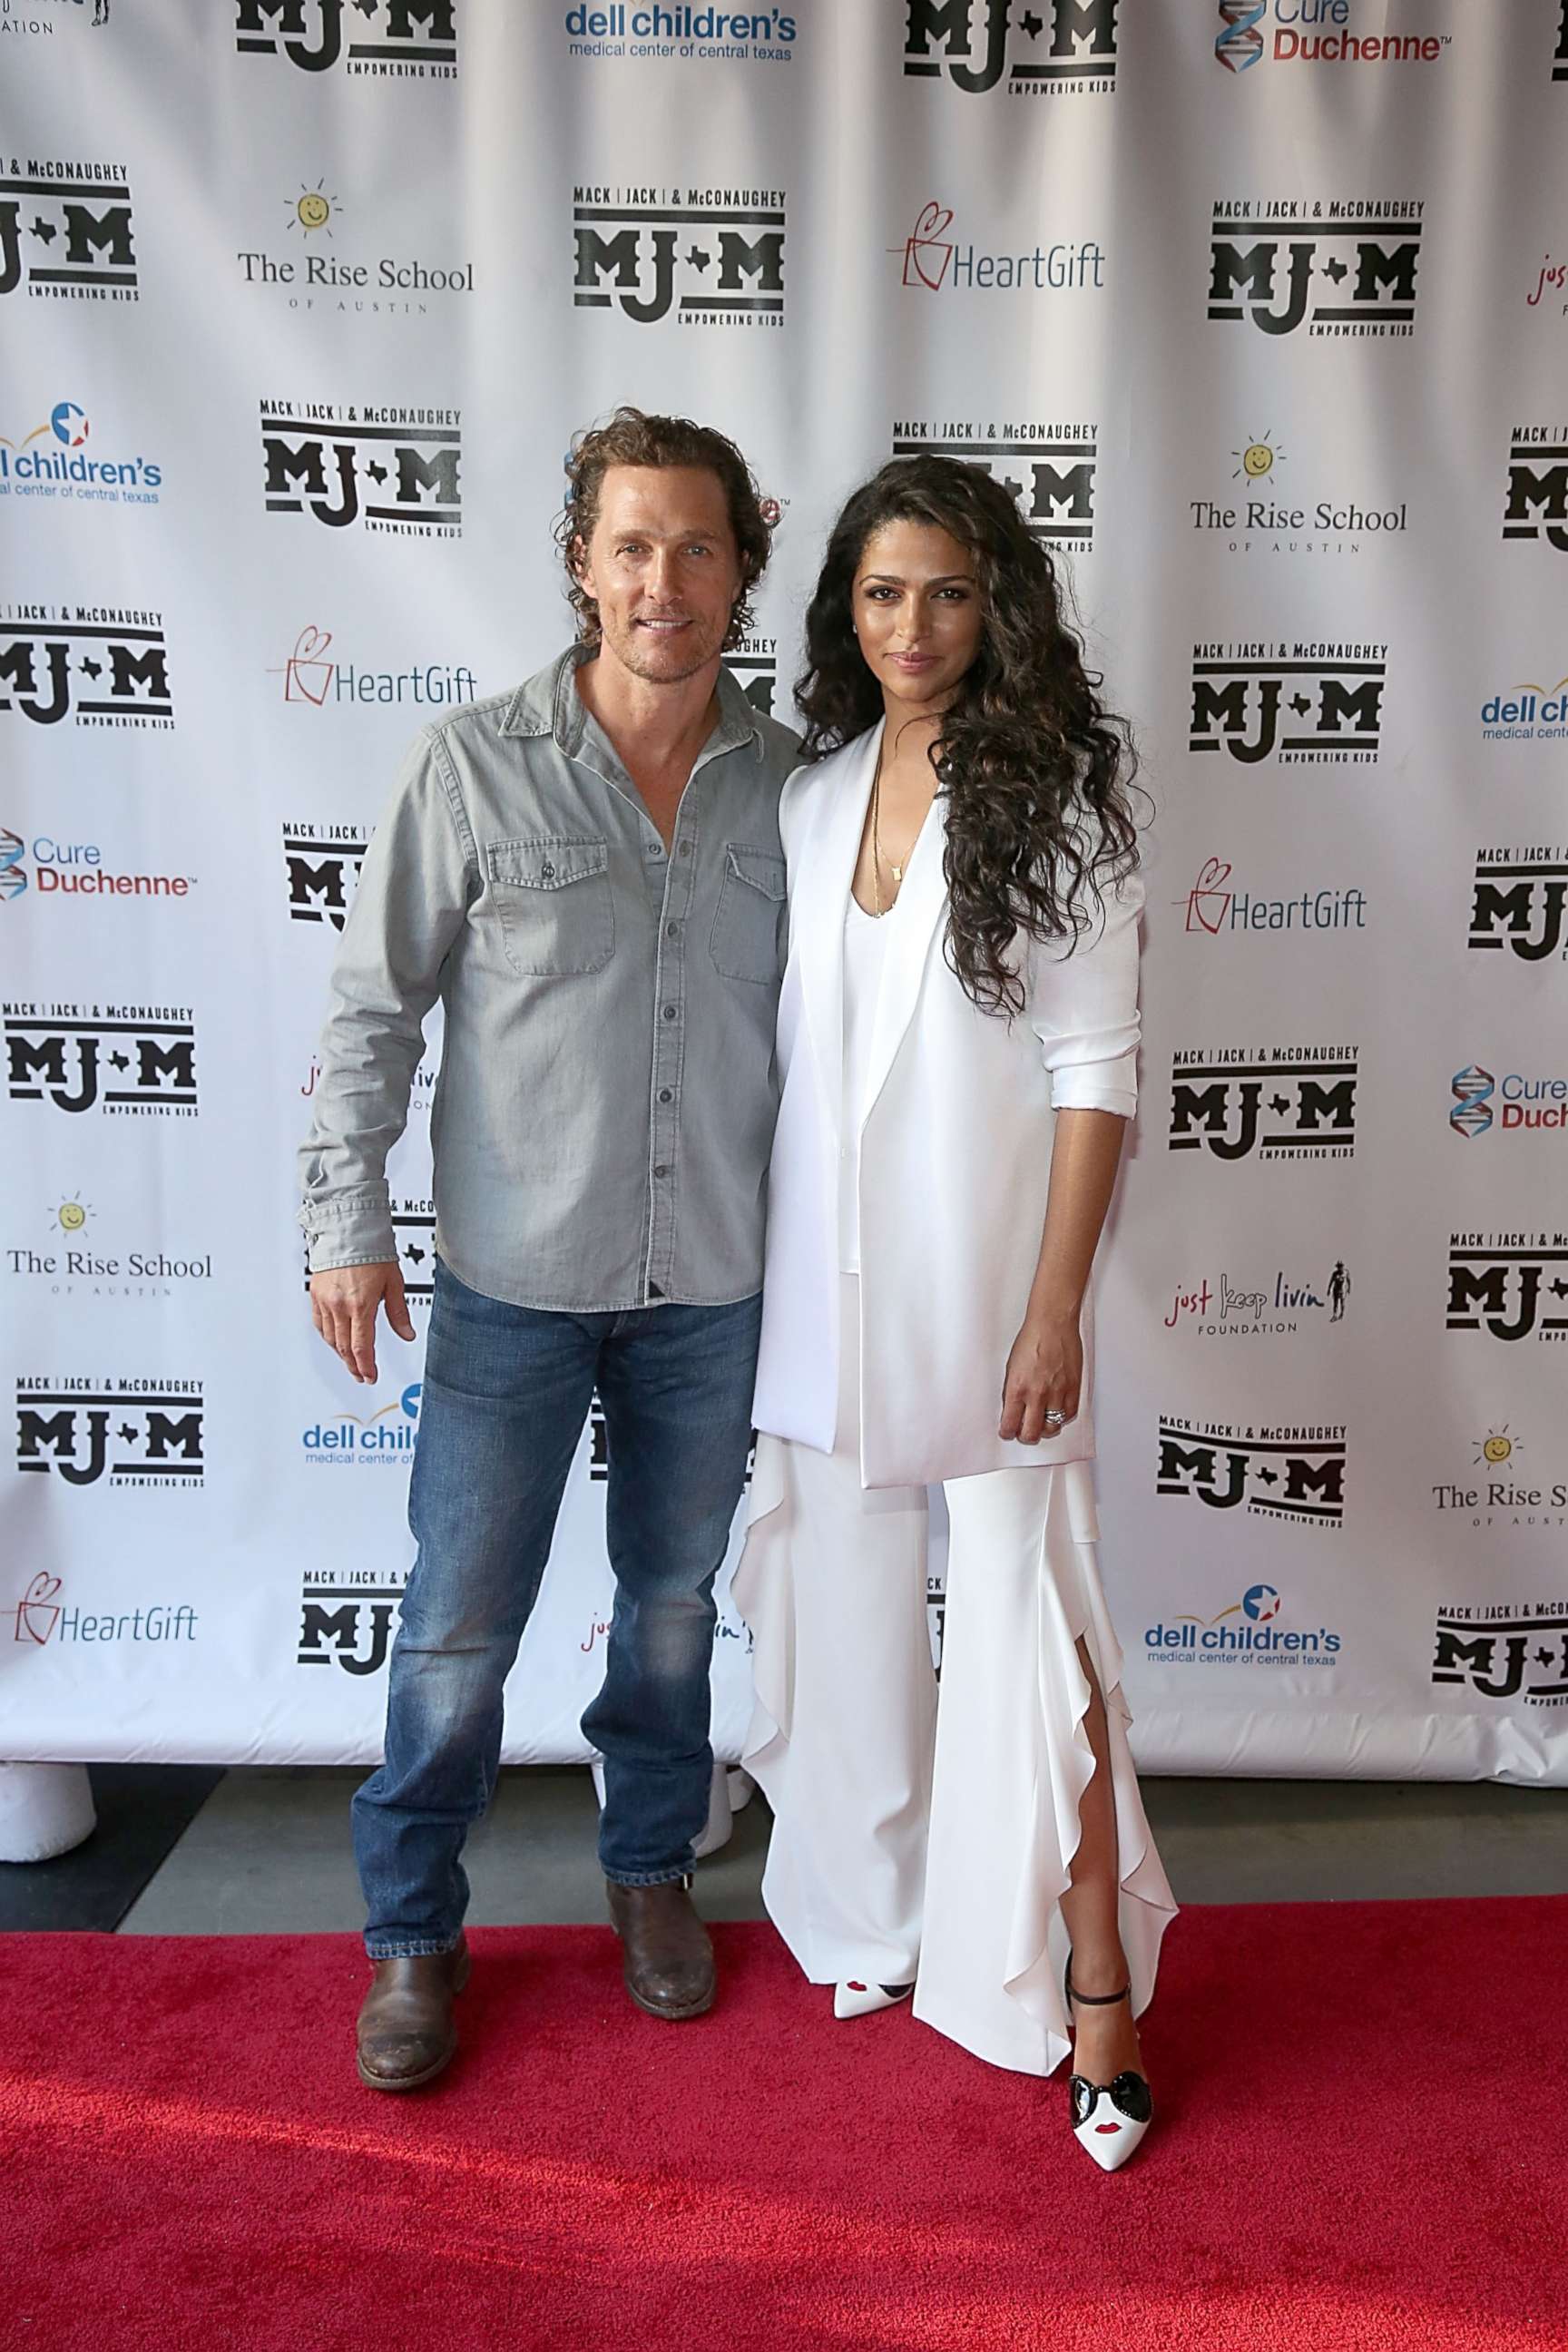 PHOTO: Matthew McConaughey and Camila Alves attend the Mack, Jack & McConaughey charity gala at ACL Live on April 12, 2018 in Austin.